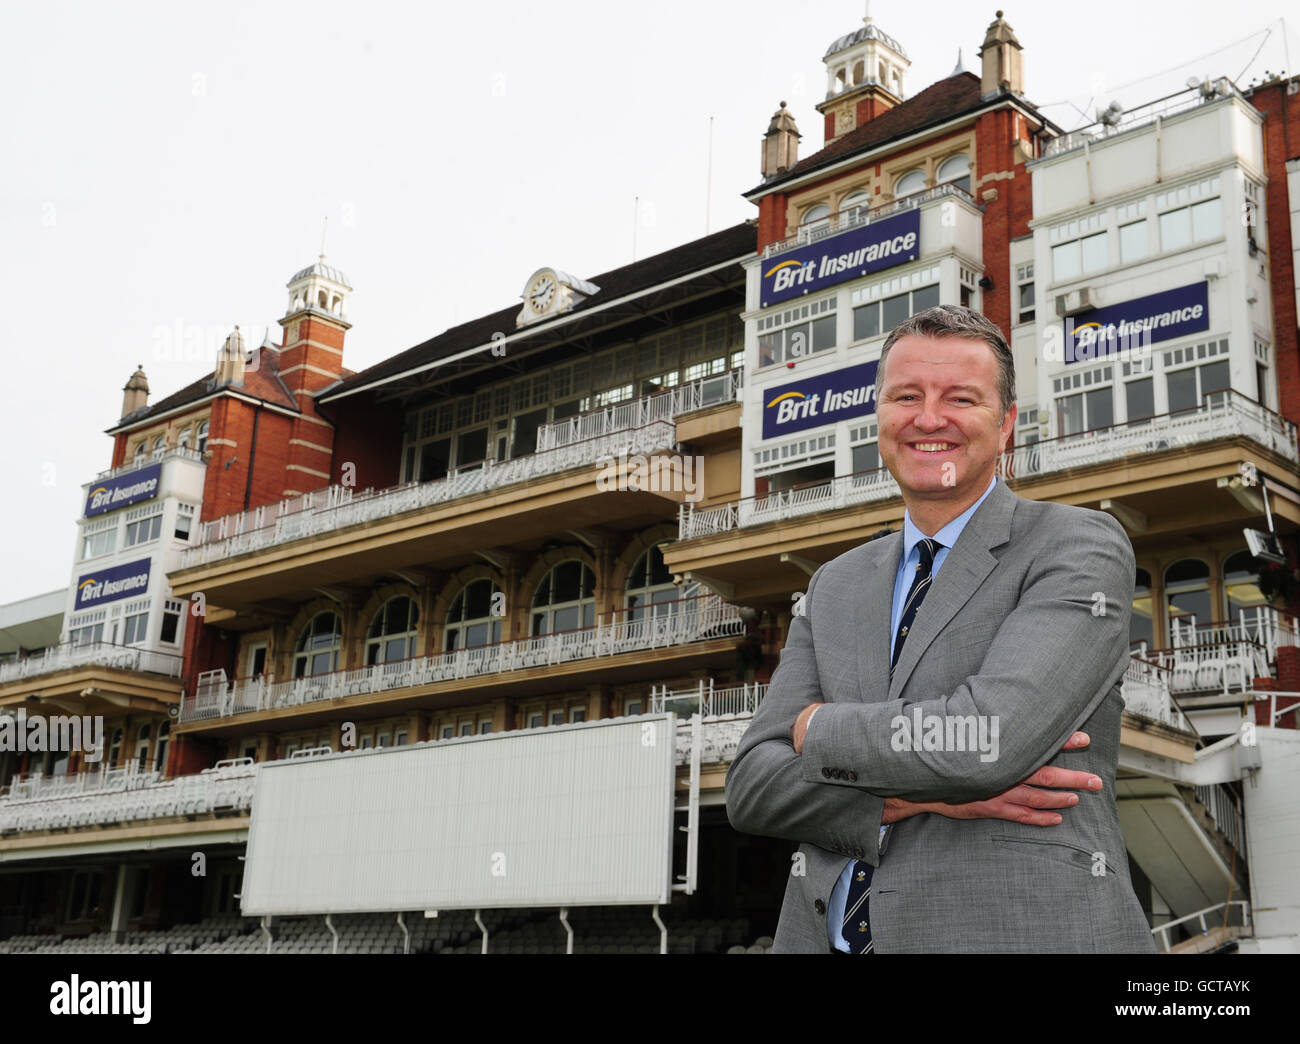 Cricket - Surrey CCC - Press Conference - The Brit Insurance Oval. Surrey CCC's new Chairman Richard Thompson at the Brit Insurance Oval Stock Photo